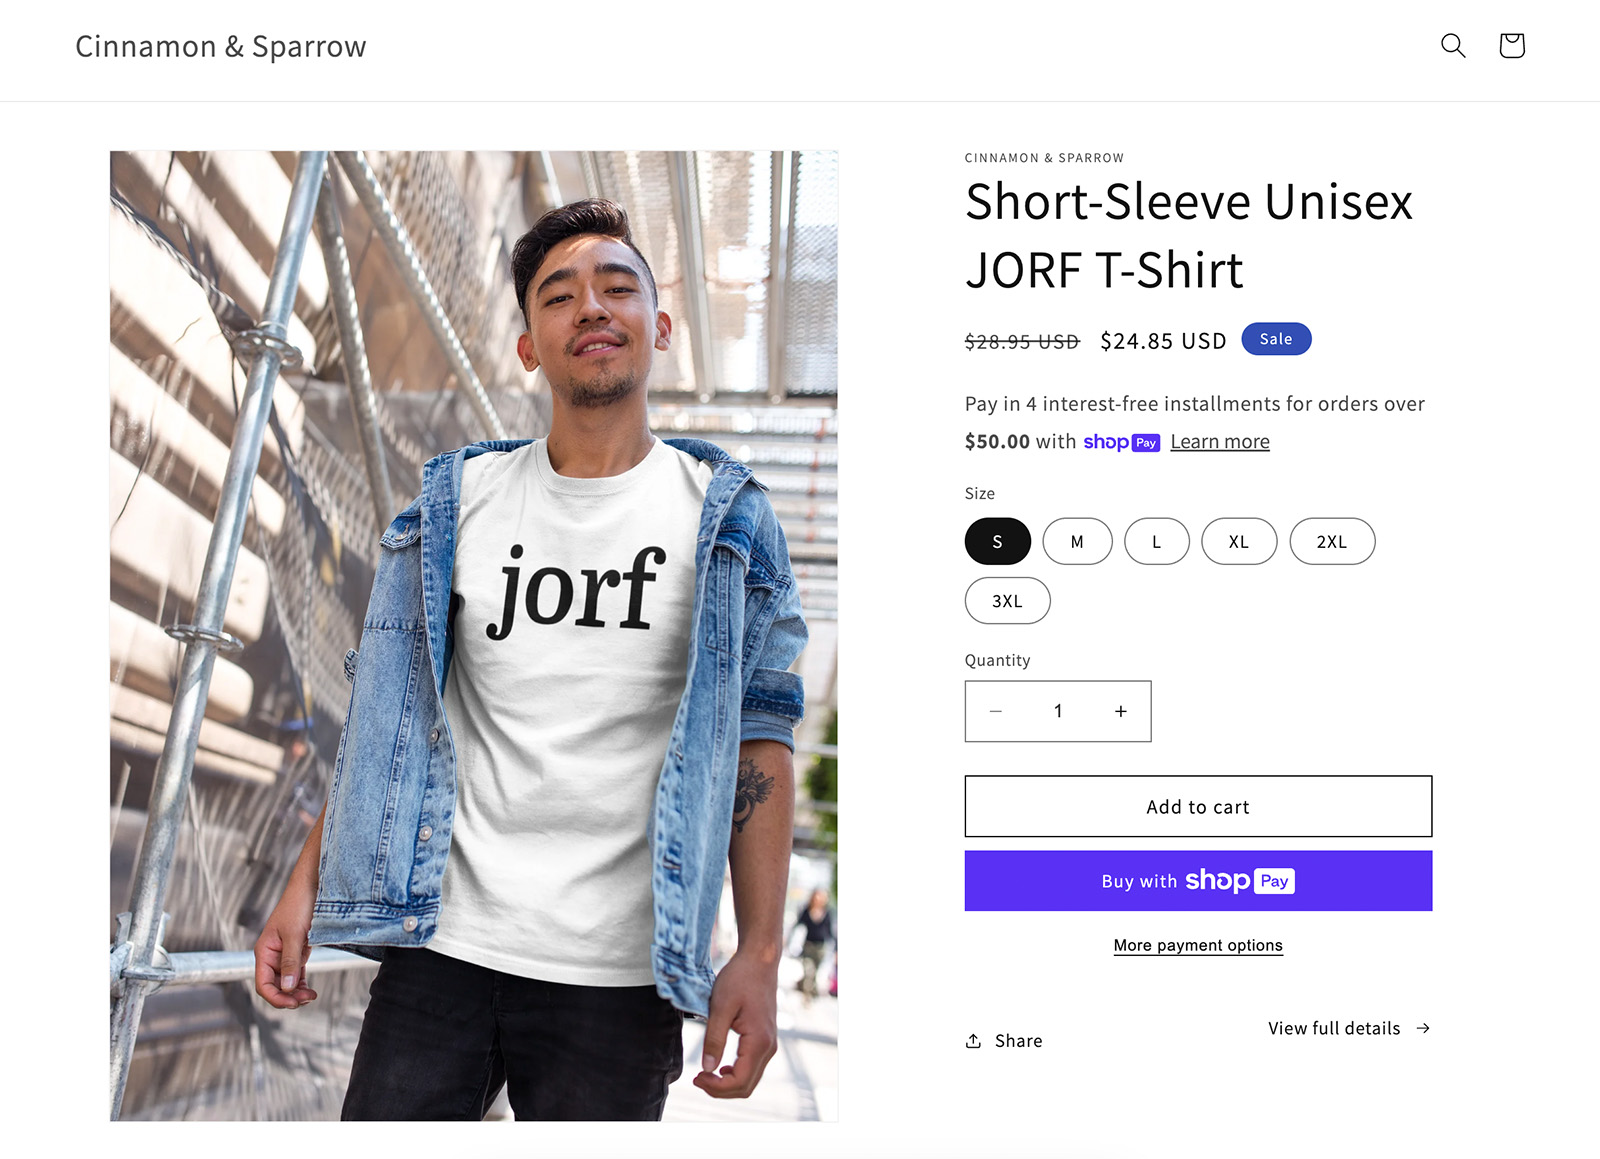 The "official" Cinnamon & Sparrow store where you can buy your very own JORF t-shirt.